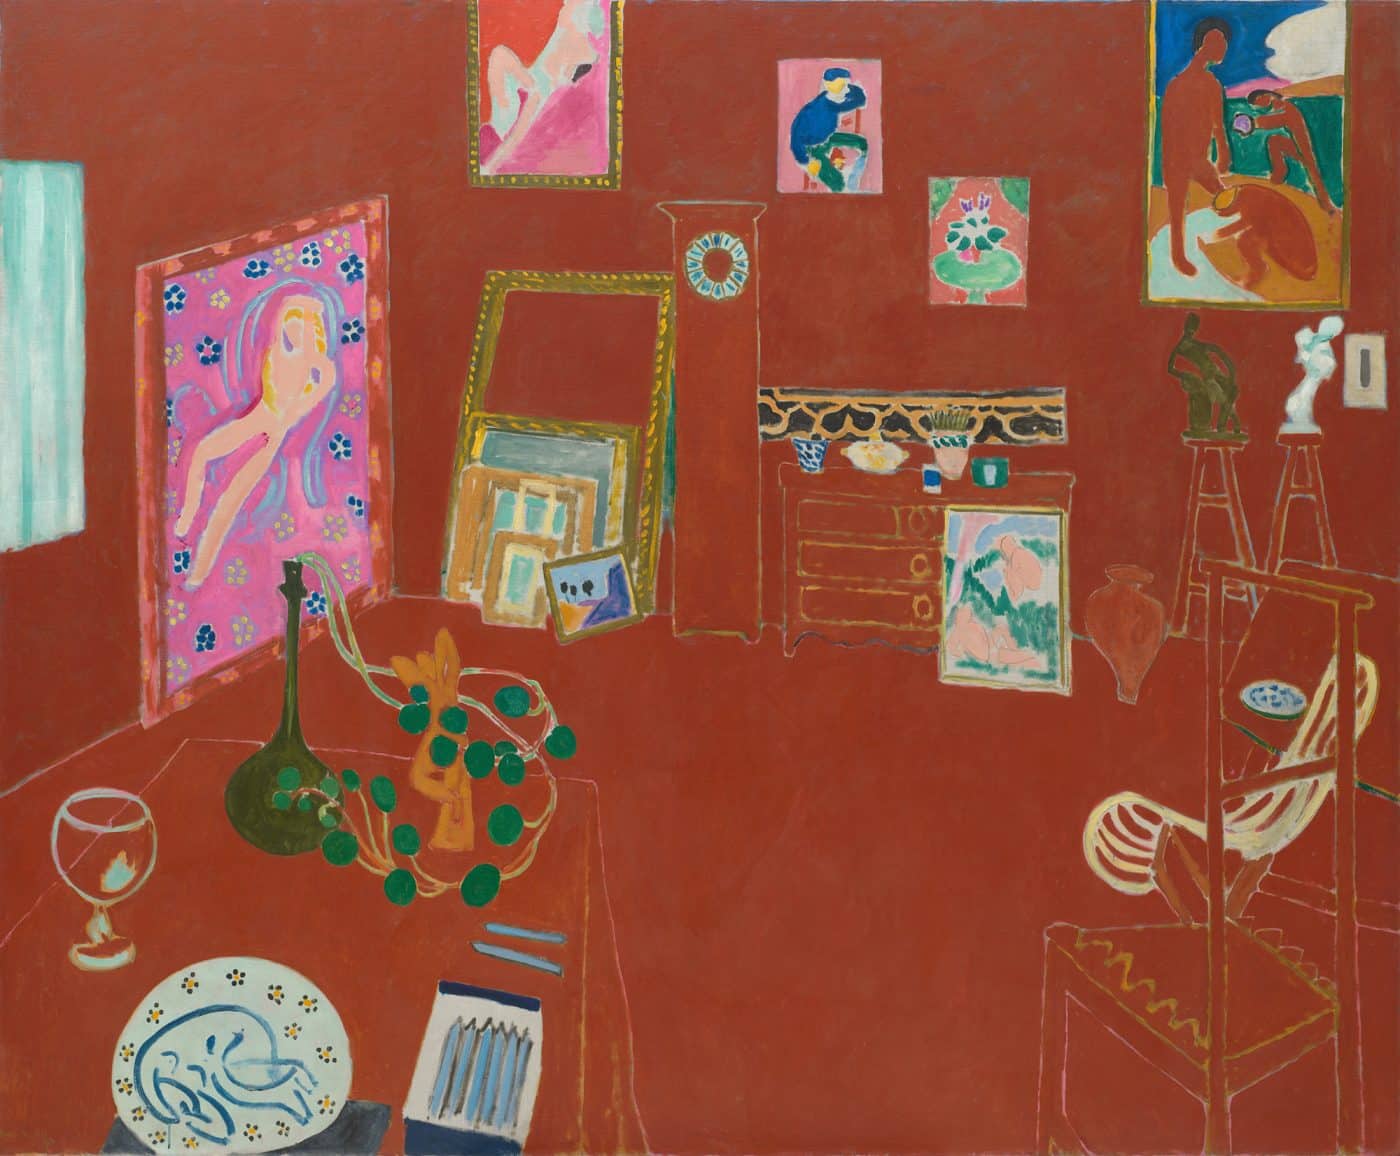 The Red Studio, 1911, by Henri Matisse